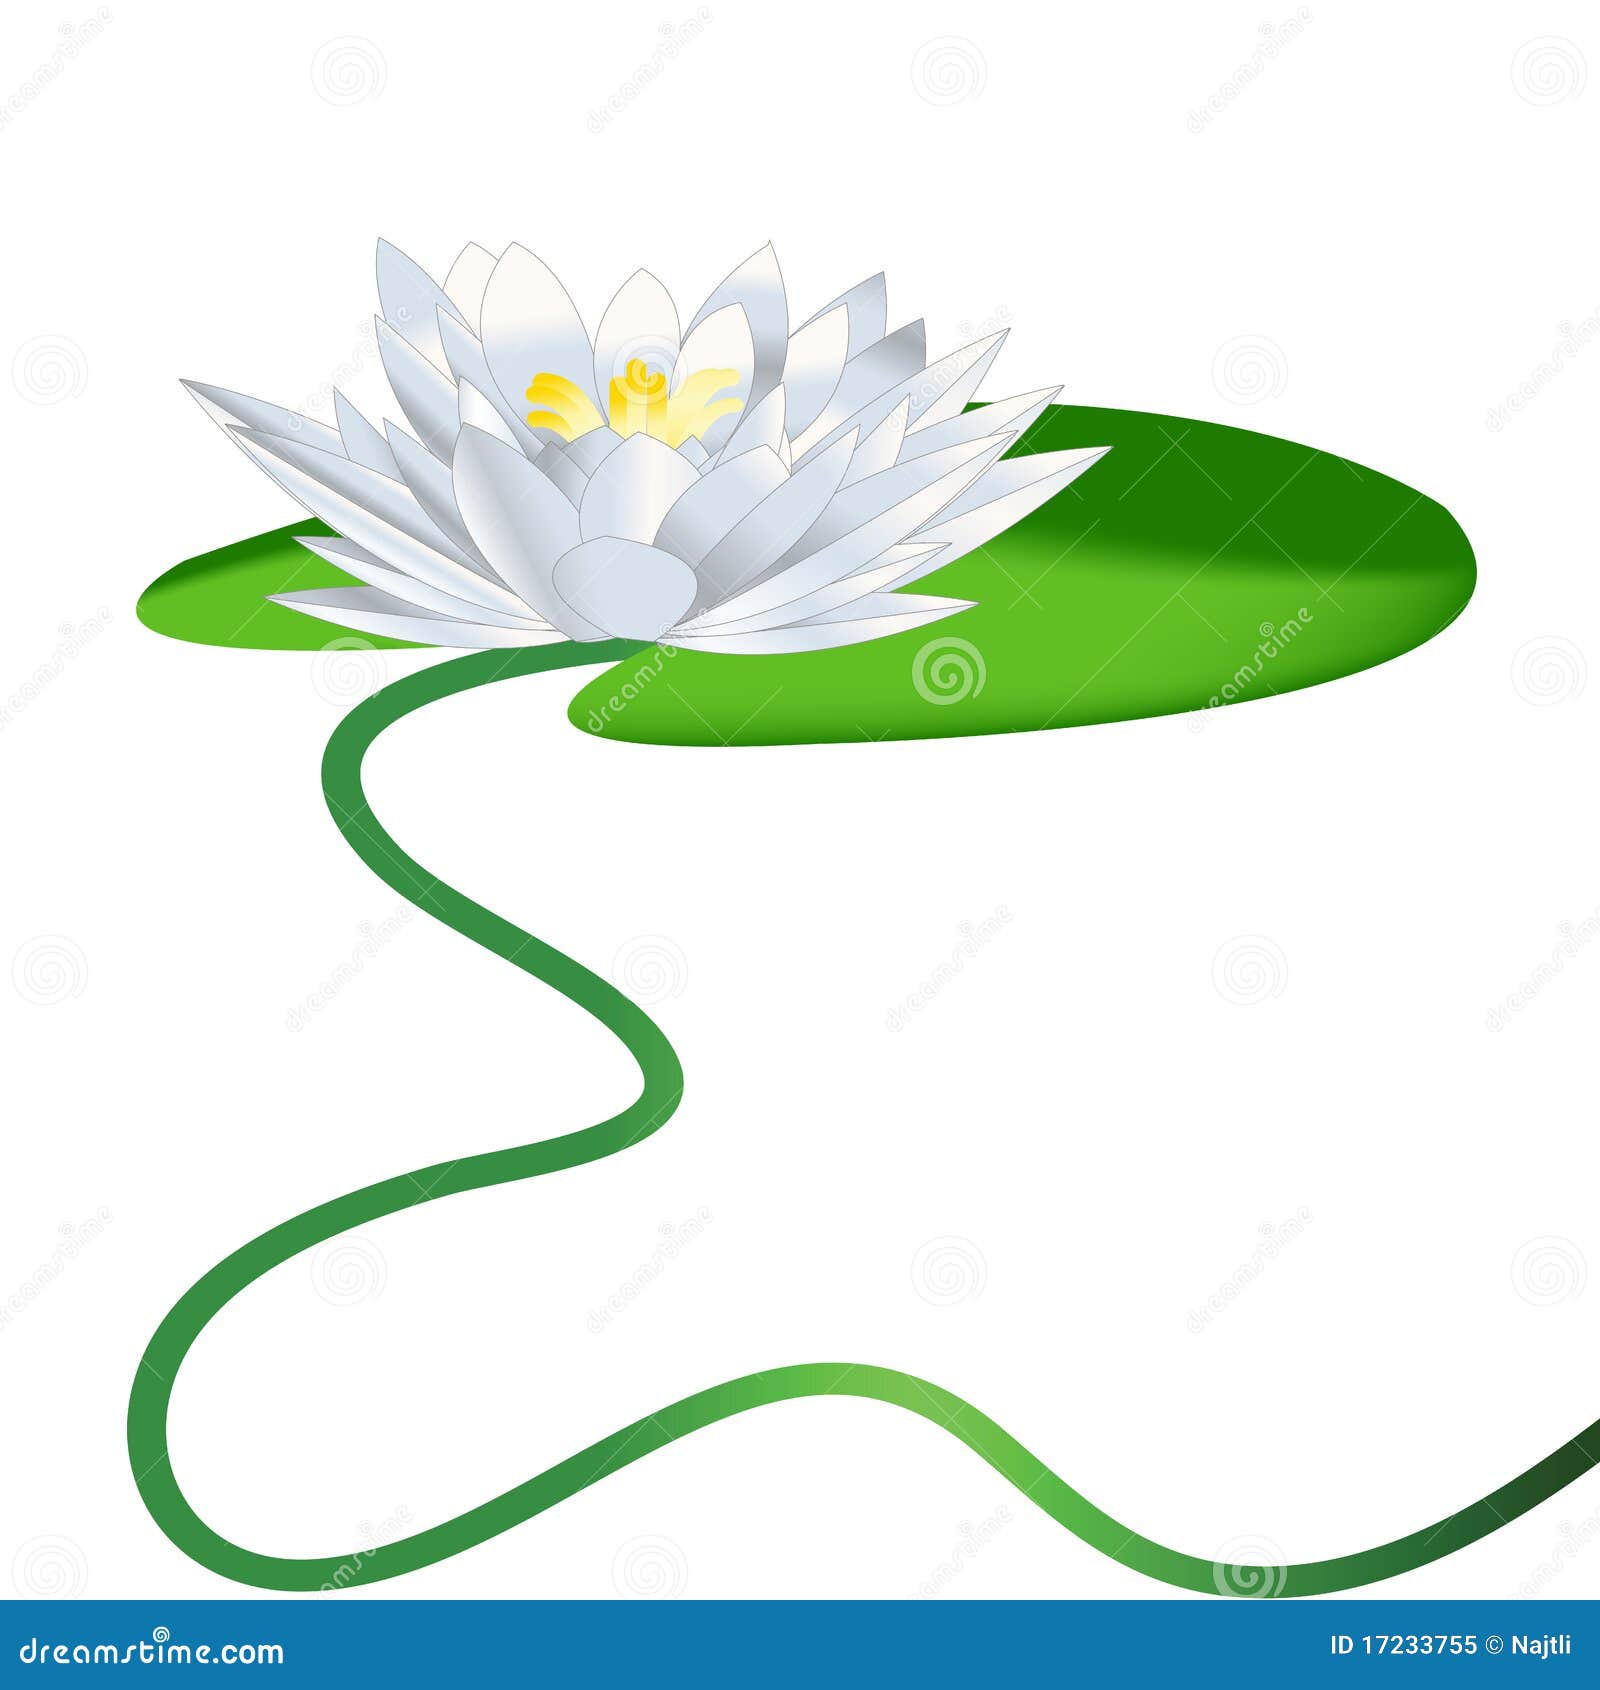 clipart water lily - photo #41